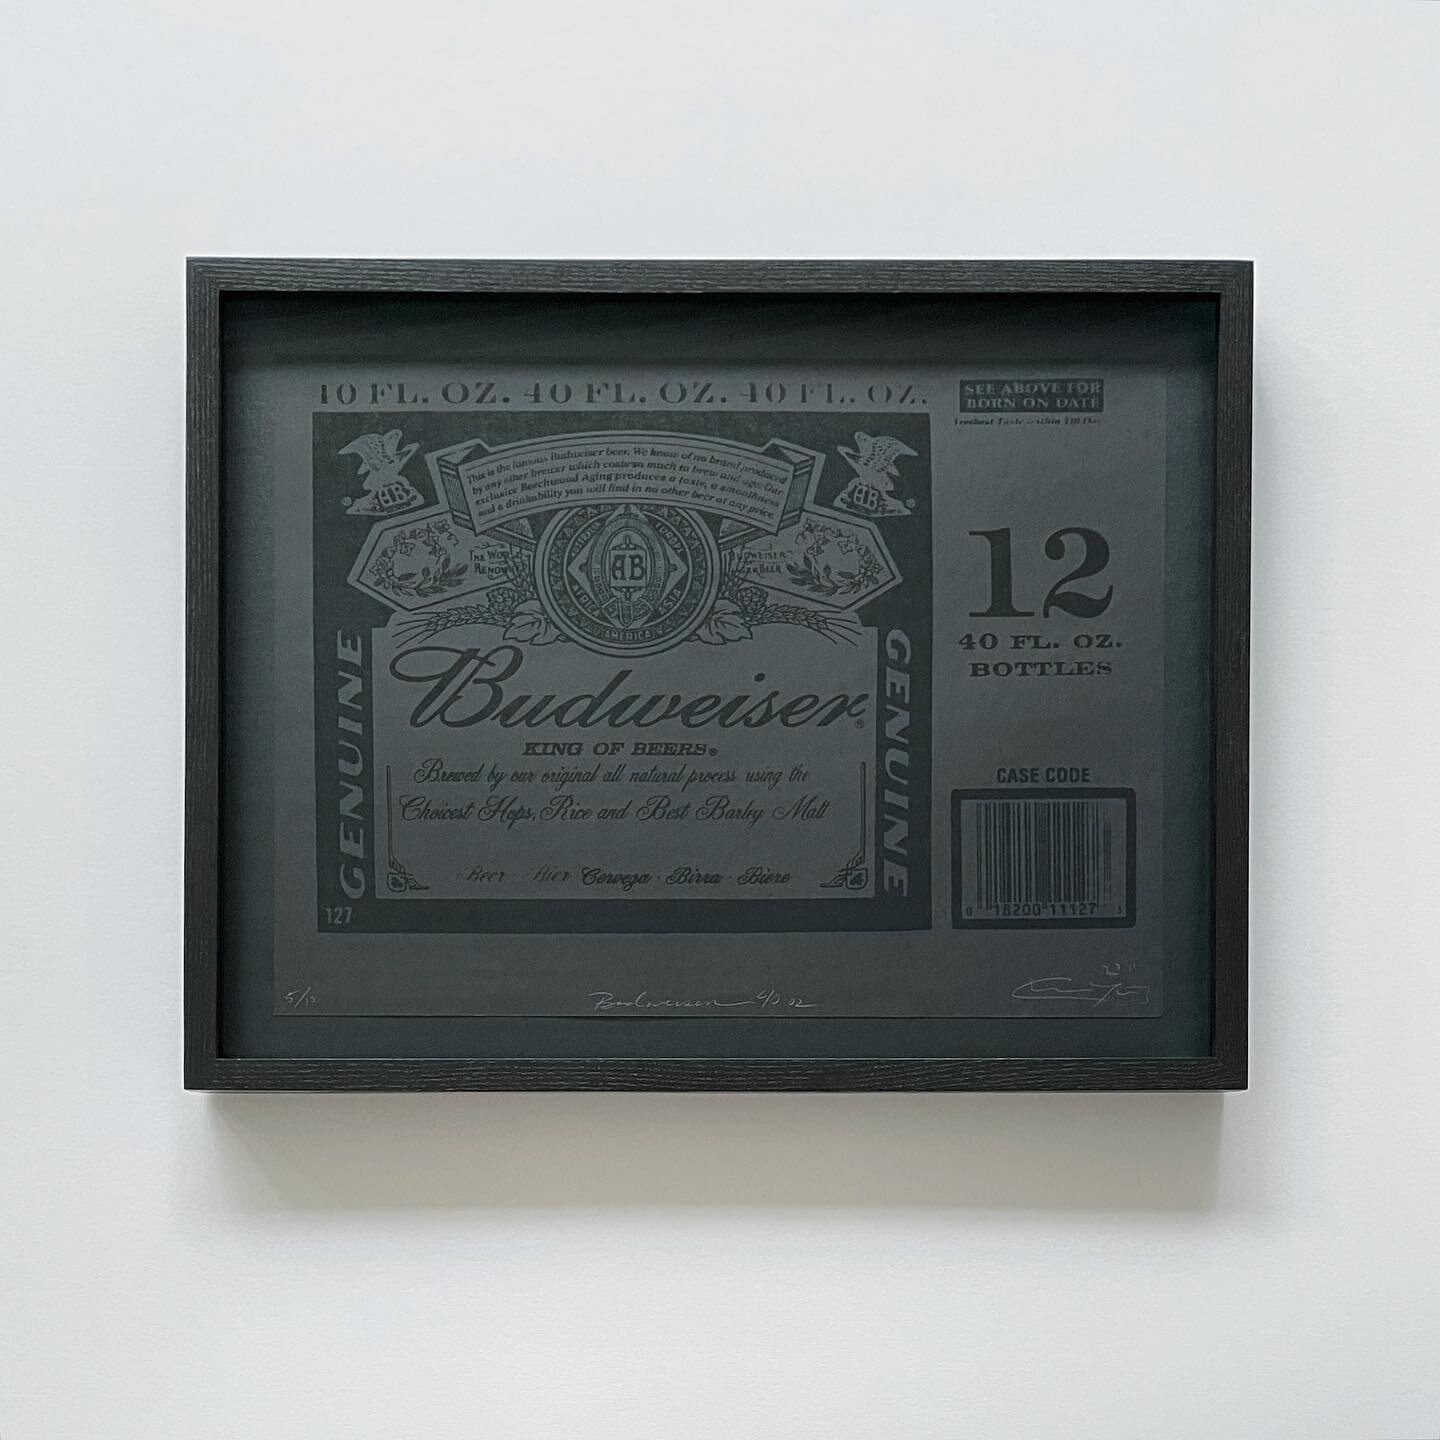 Budweiser silkscreen print by Charles Lutz @charleslutz 🍺
Framed in ash, stained black, polished and waxed with matching ash splines